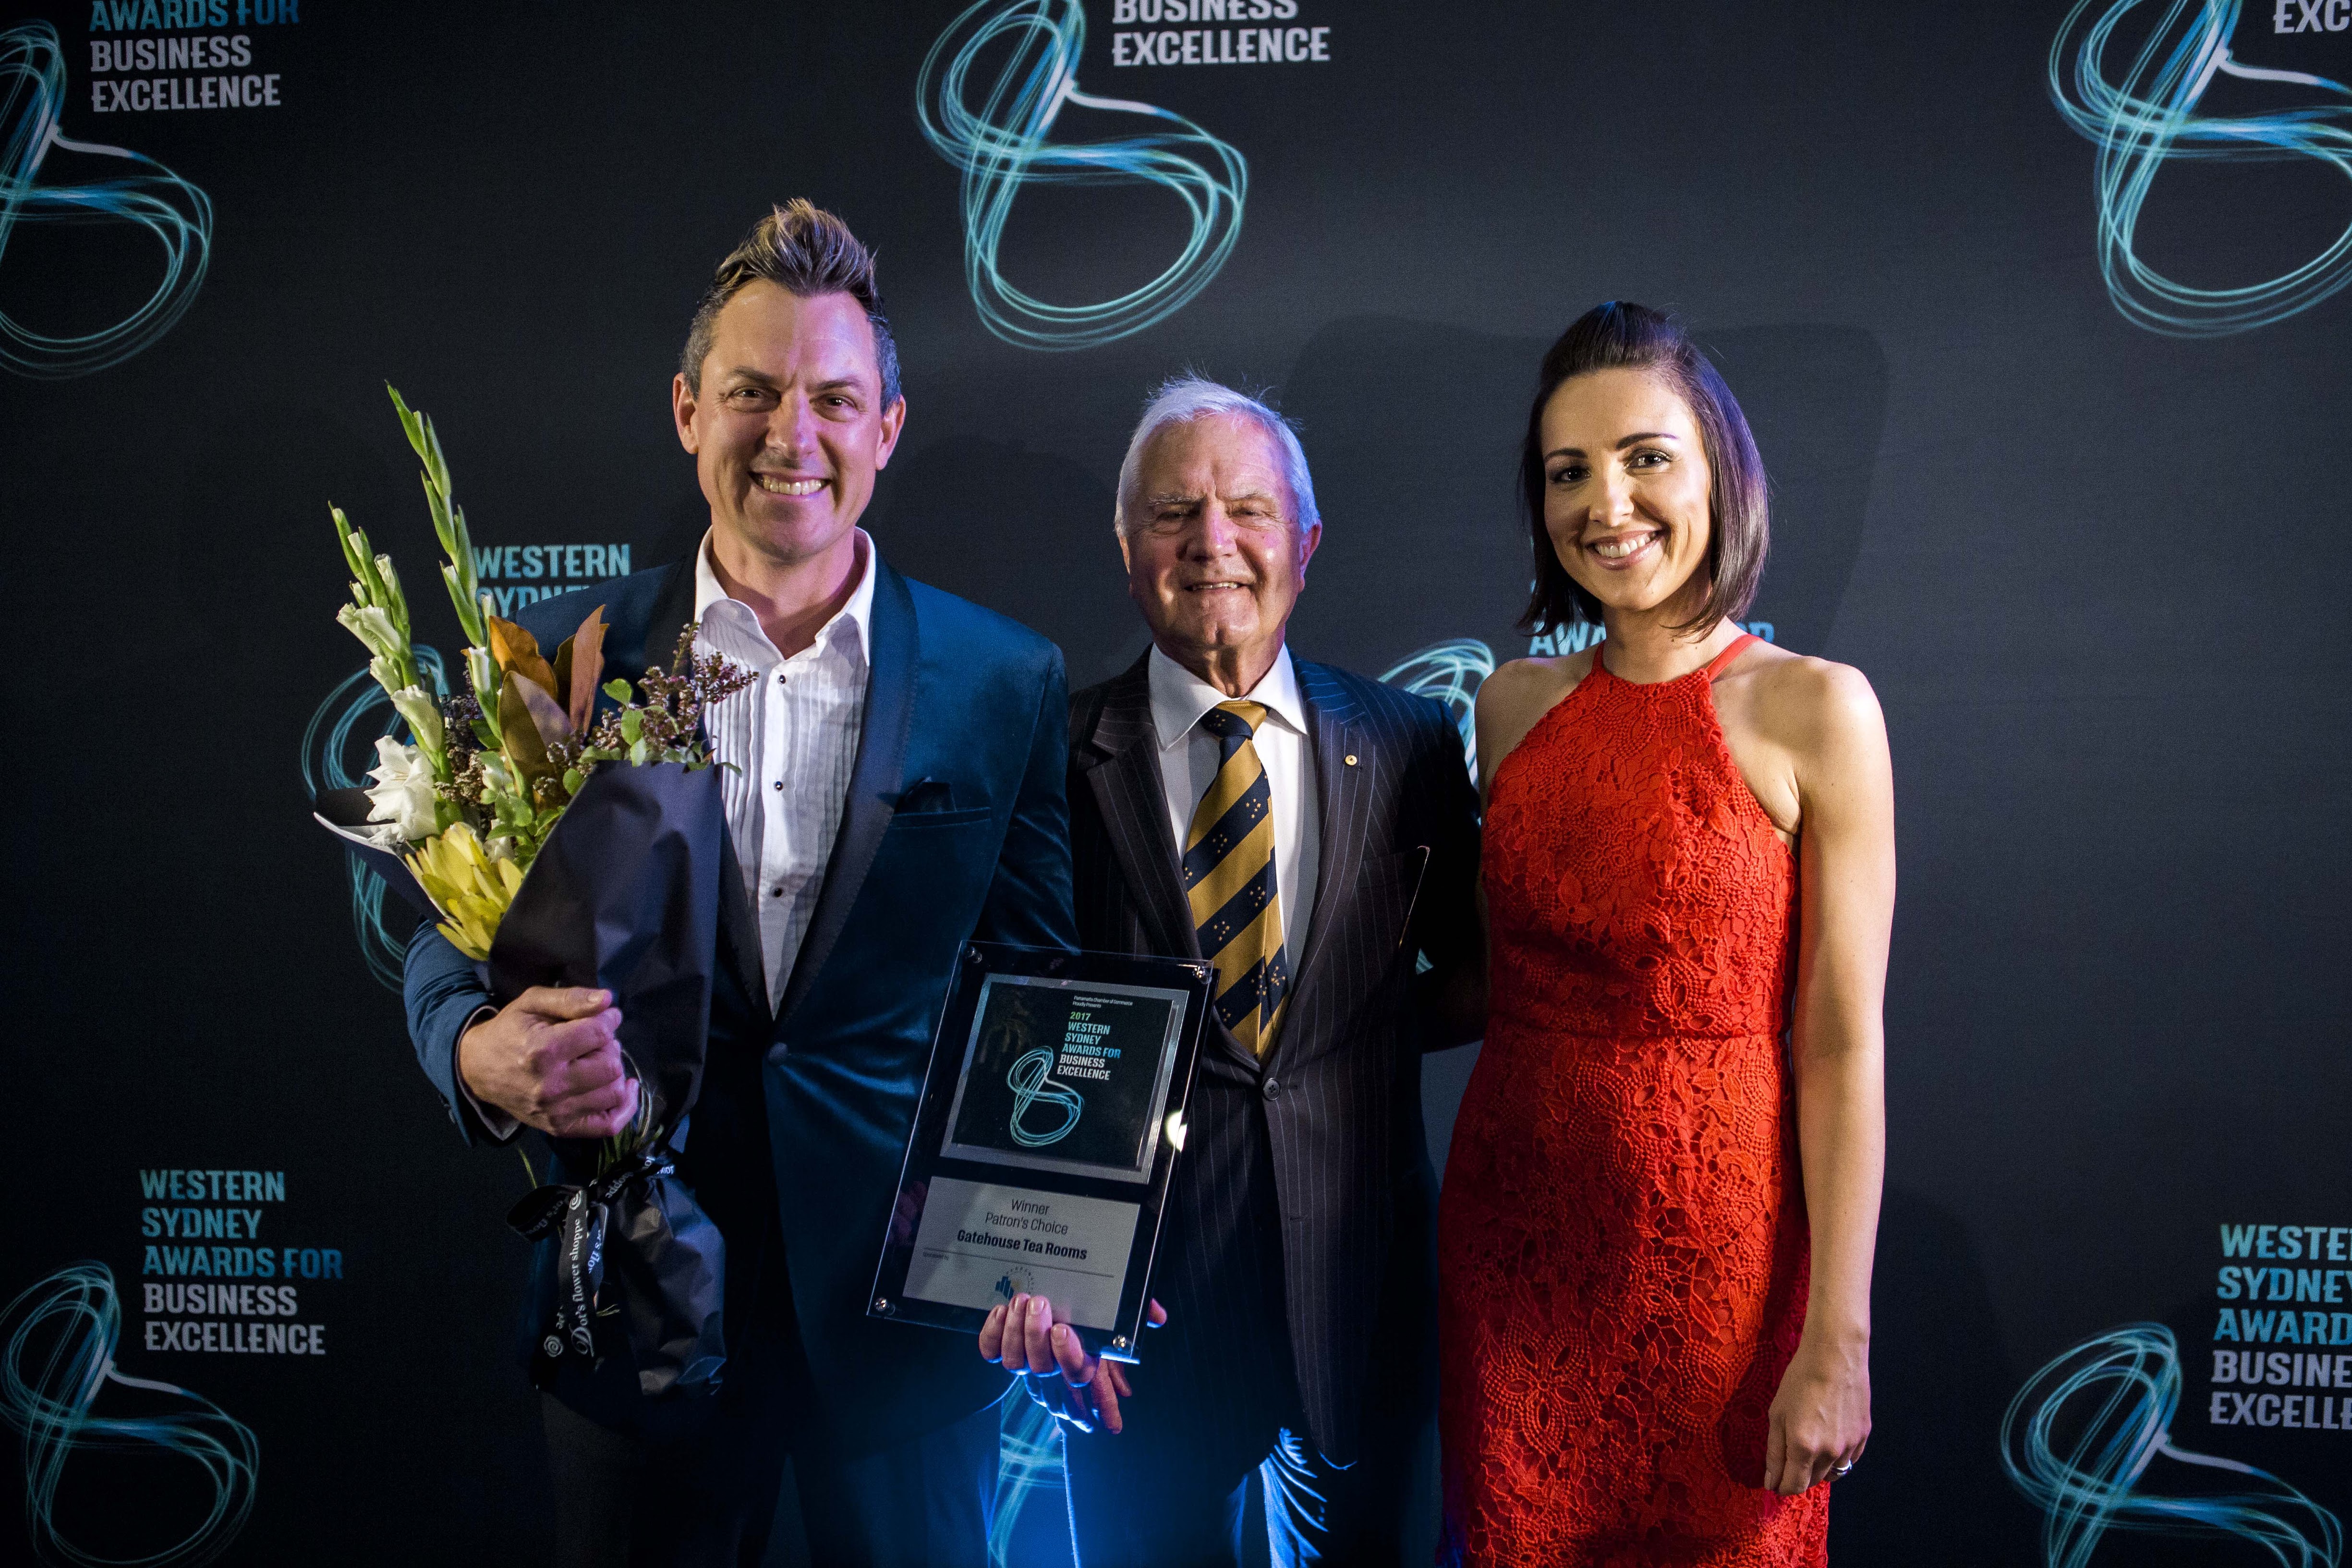 WESTERN SYDNEY AWARDS FOR BUSINESS EXCELLENCE, WINNER OF PATRON'S CHOICE AWARD FOR OUTSTANDING BUSINESS ACHIEVEMENT 2017